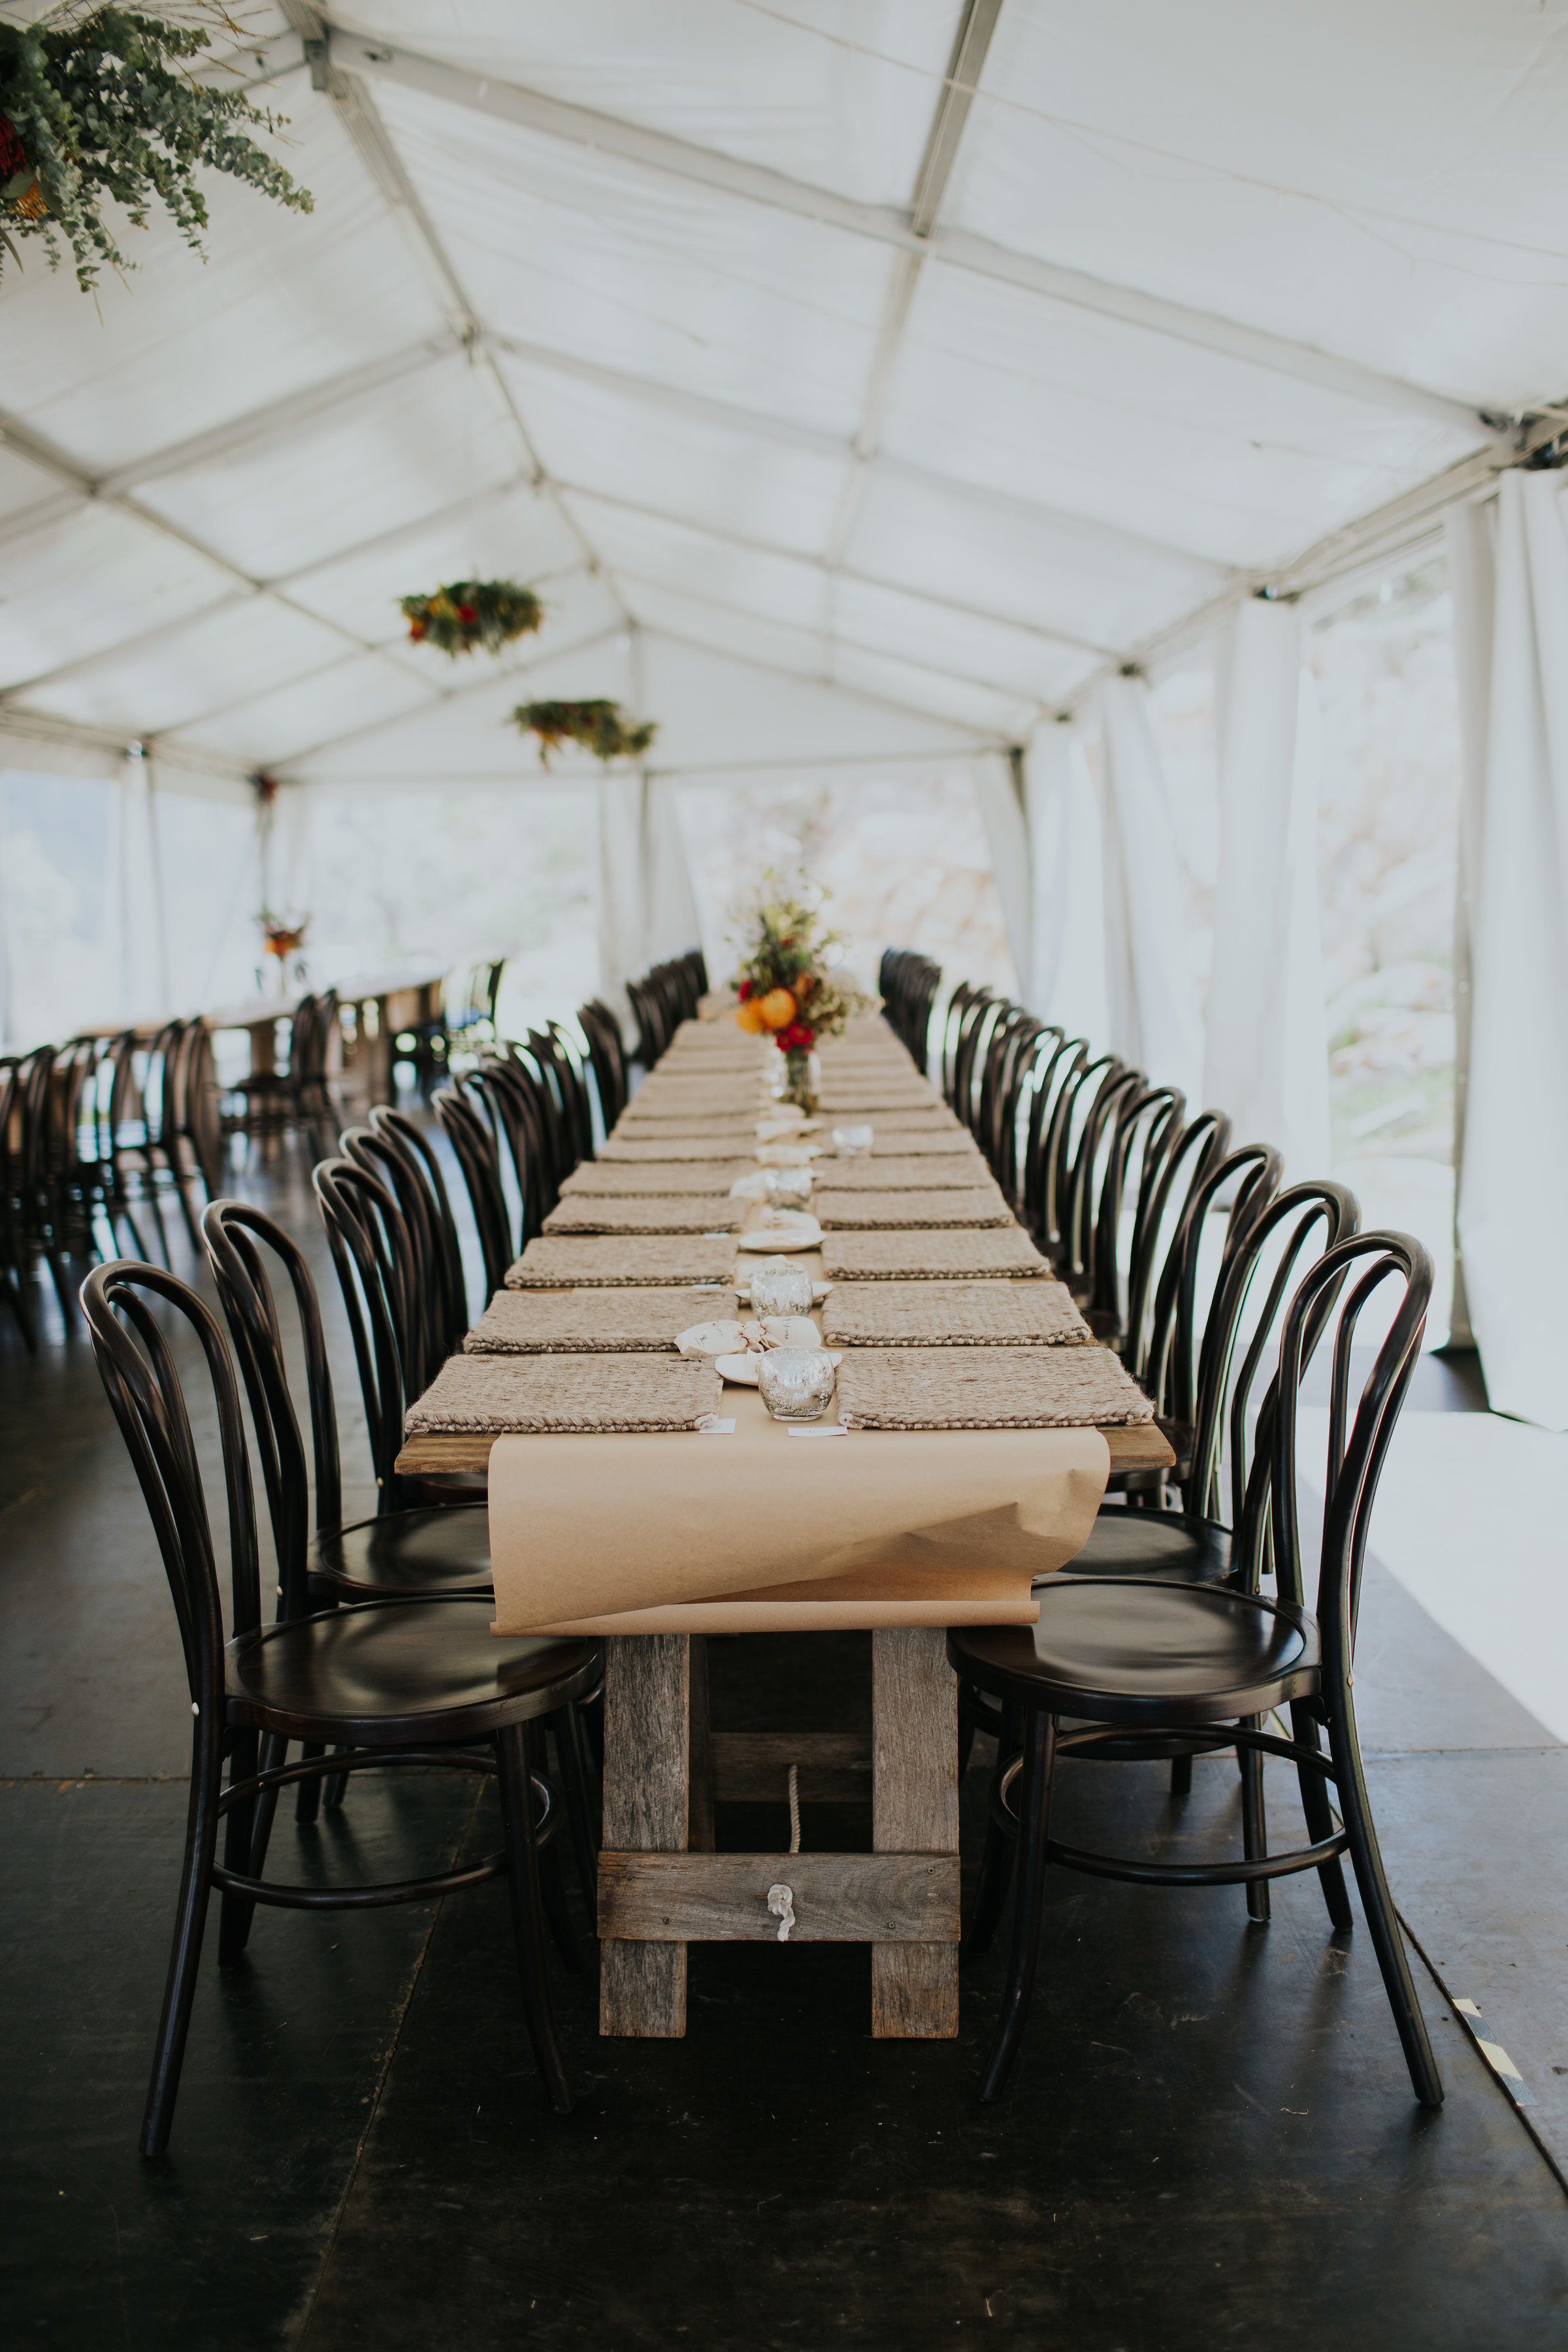 Boho Wedding Reception with Timber Chairs, Rustic Table, Neutral Tones and Vibrant Floral Accents under Hocker Marquee